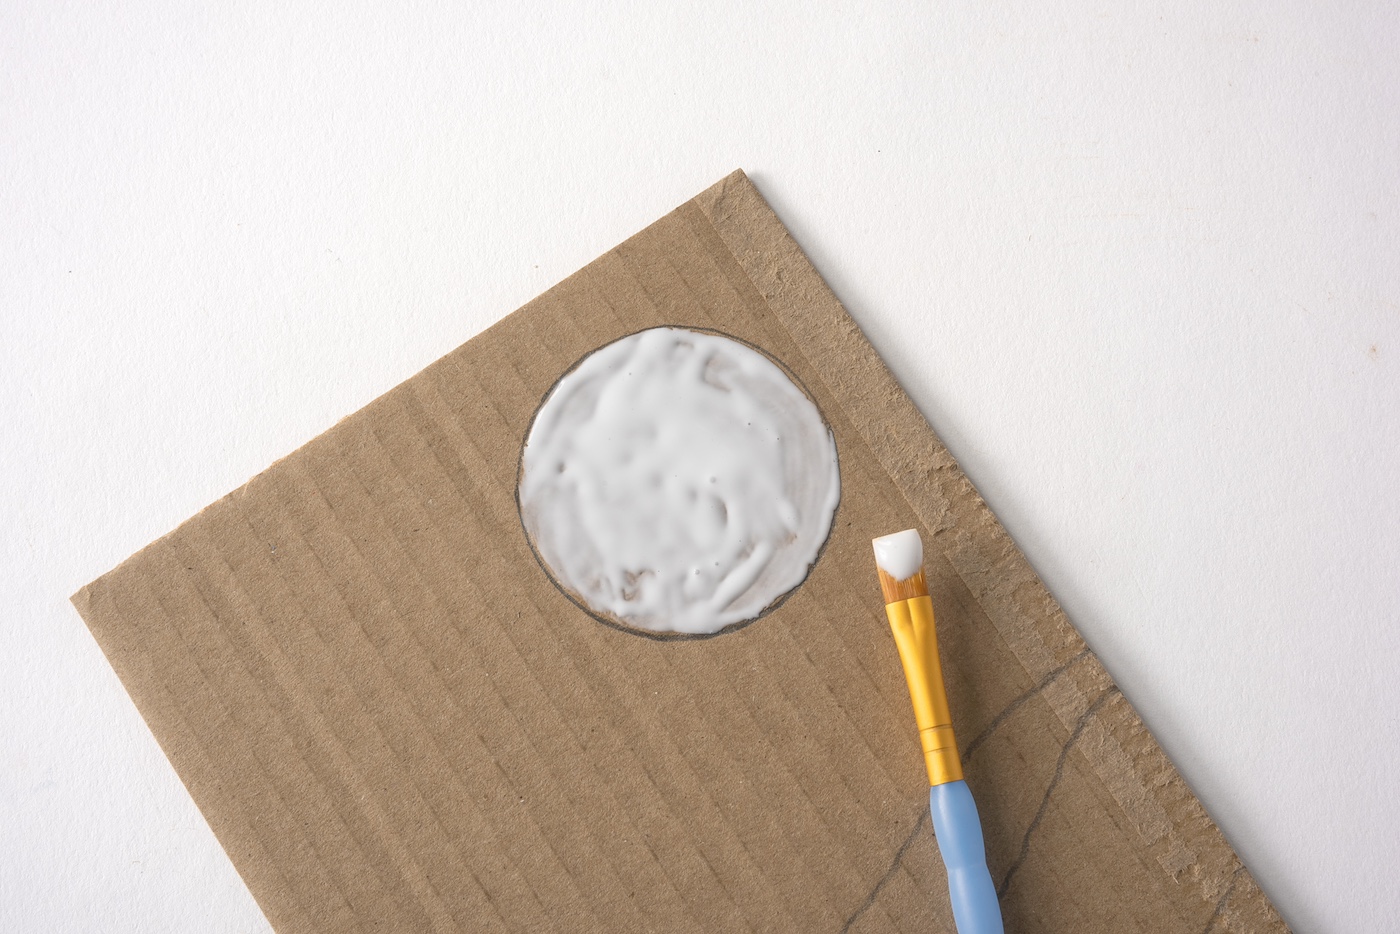 Glue applied to the cardboard surface